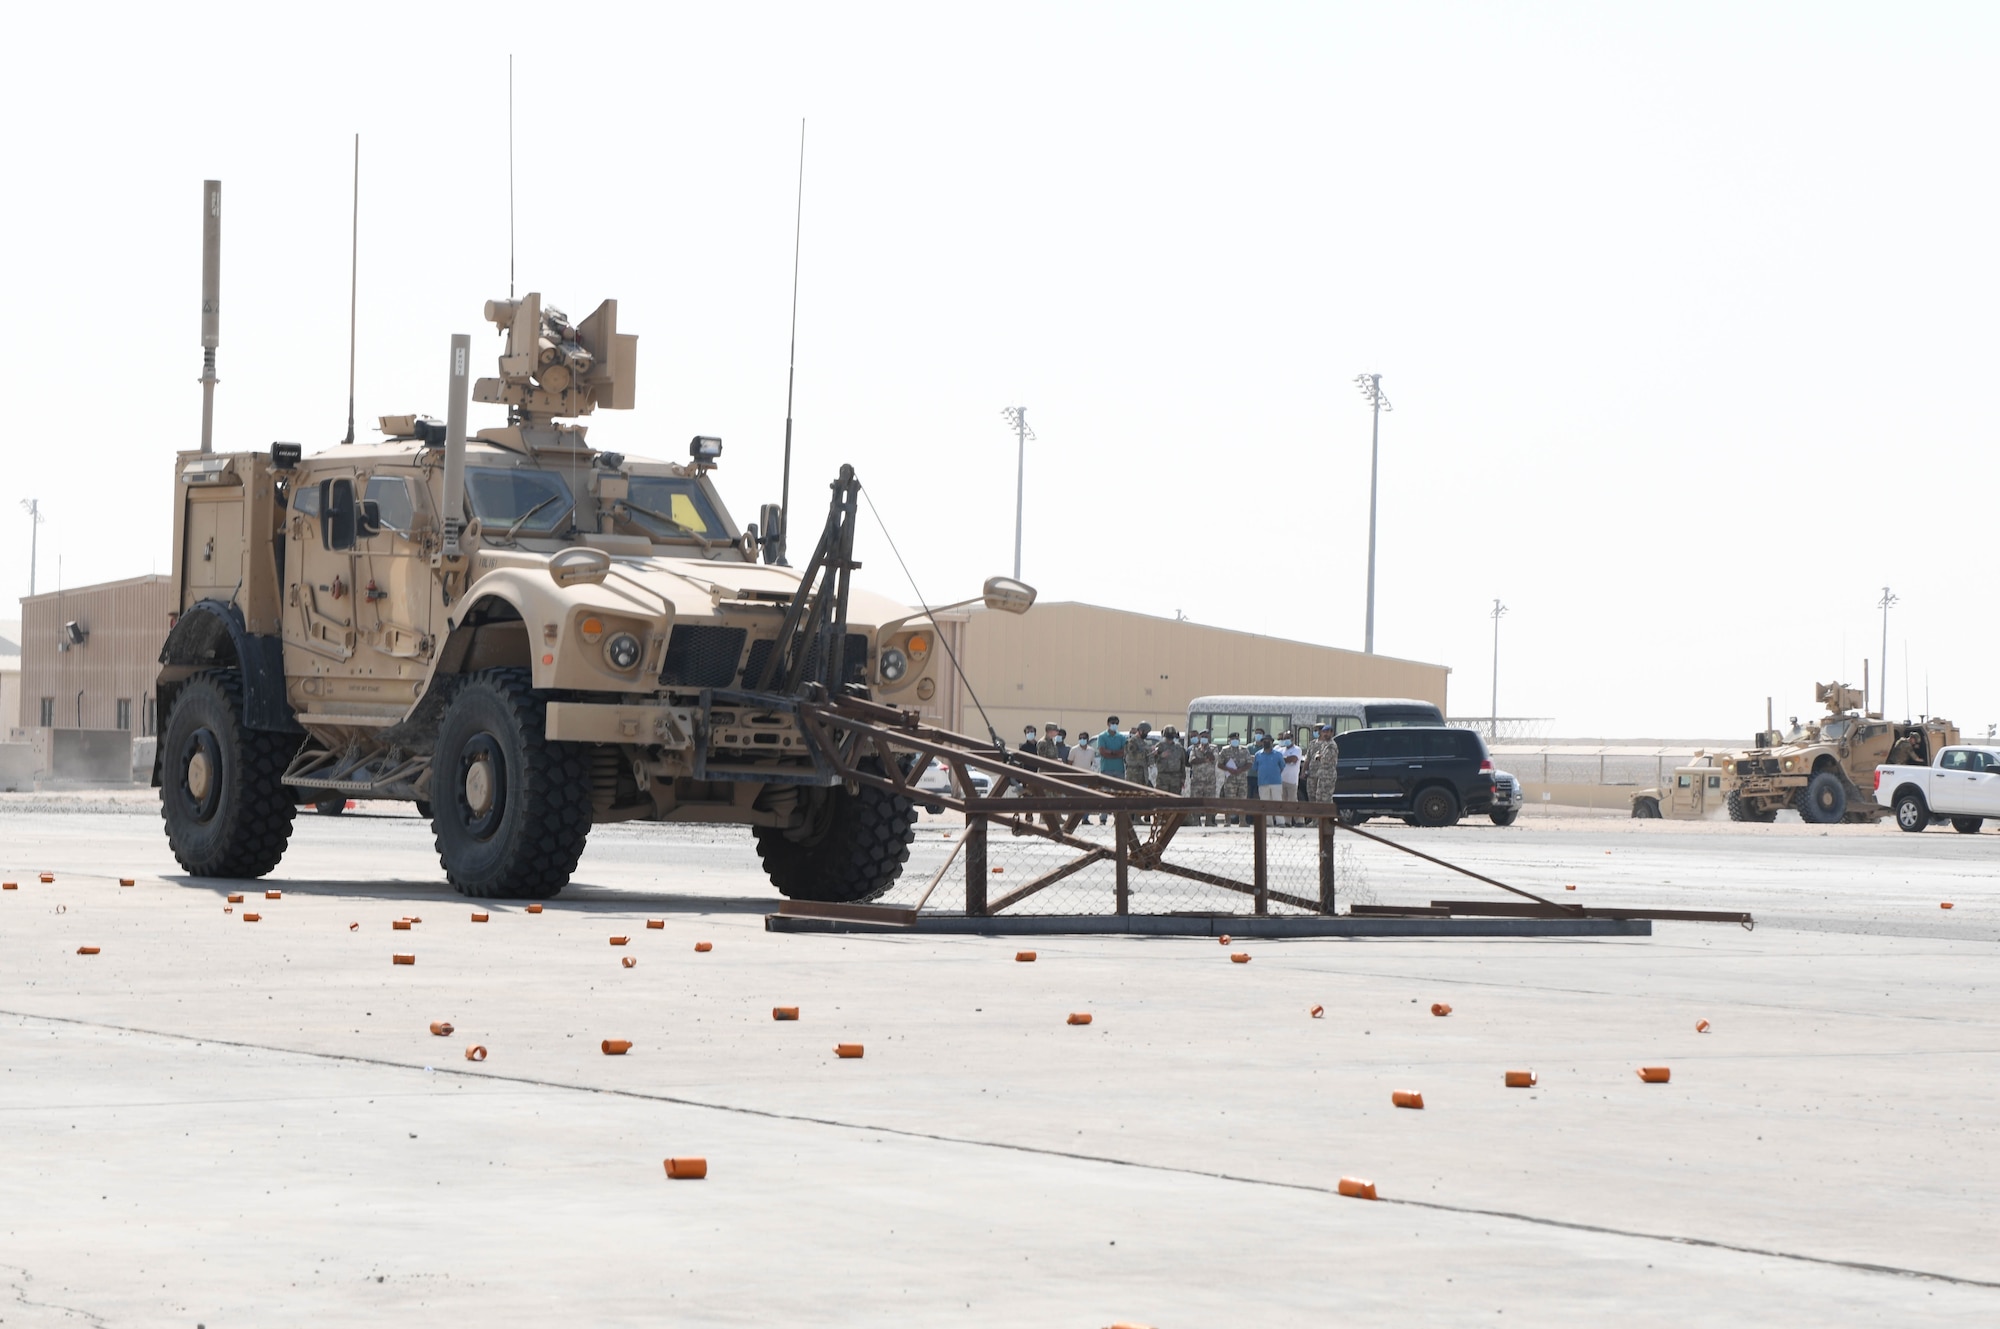 U.S. Airmen assigned to the 379th Expeditionary Civil Engineer Squadron explosive ordnance disposal branch, drive a mine-resistant ambush-protected all-terrain vehicle during rapid airfield damage repair training at Al Udeid Air Base, Qatar, Nov. 18, 2020. They used the M-ATV to clear simulated unexploded ordnance from a training field before engineers came through during the next phase of RADR training, which prepares ECES Airmen to make expeditious repairs to an airfield after it has been damaged in an attack. (U.S. Air Force photo by Staff Sgt. Kayla White)